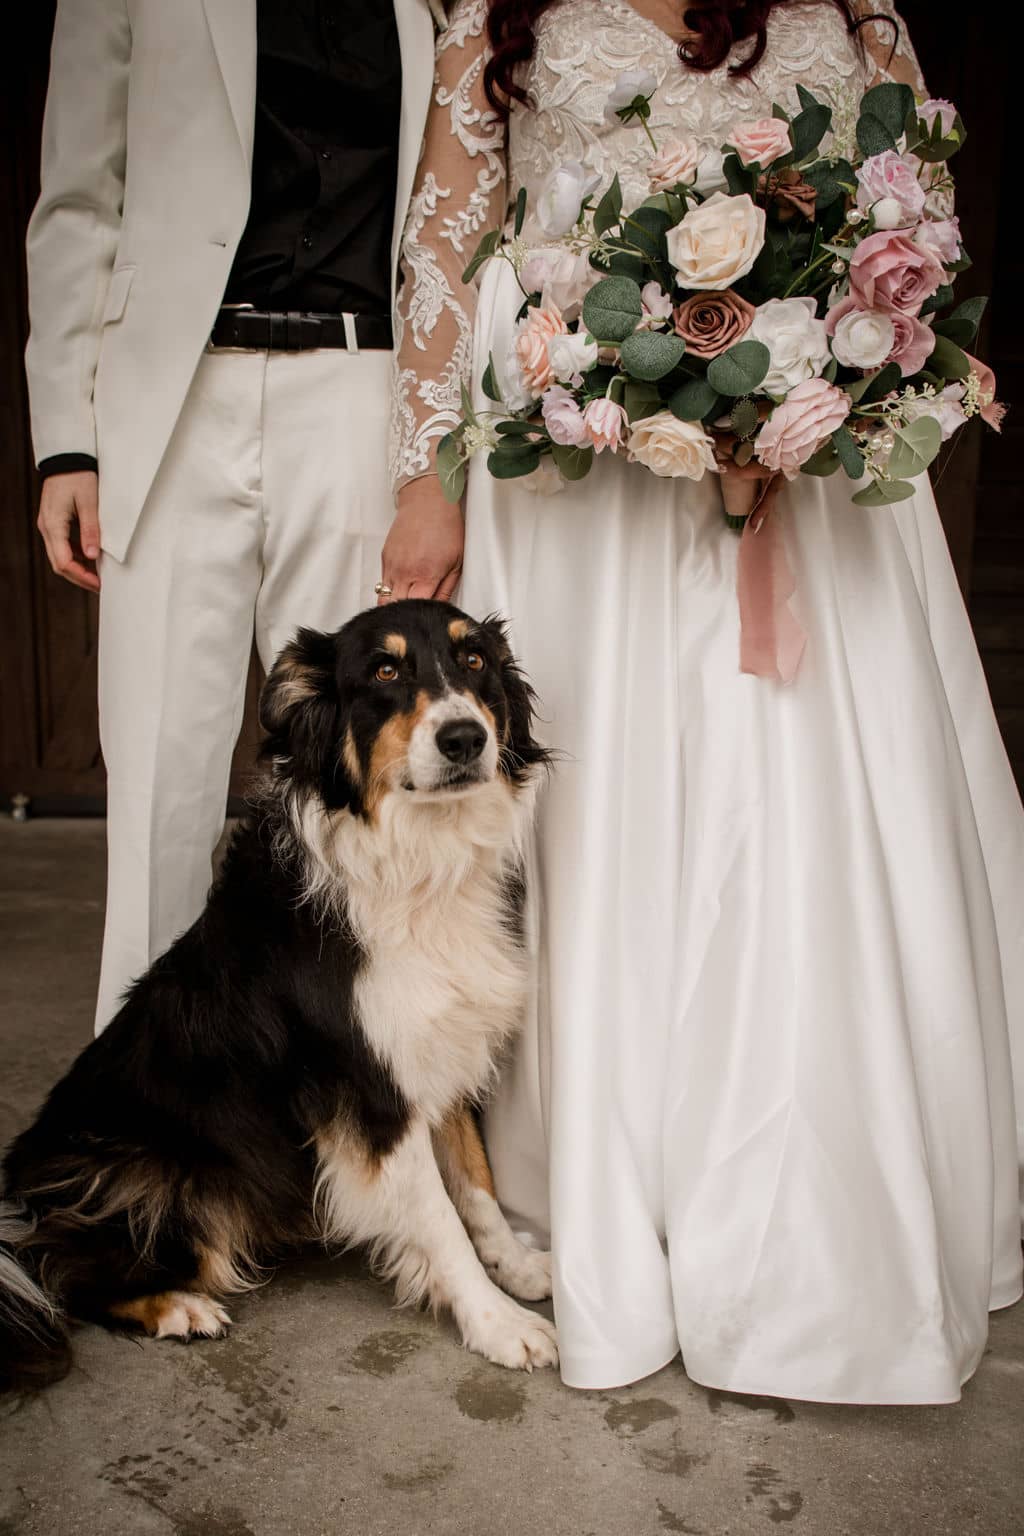 in learning how to plan a wedding in bryan college station, the brides found a venue that is dog friendly. both brides are cropped posed with their dog in front of them